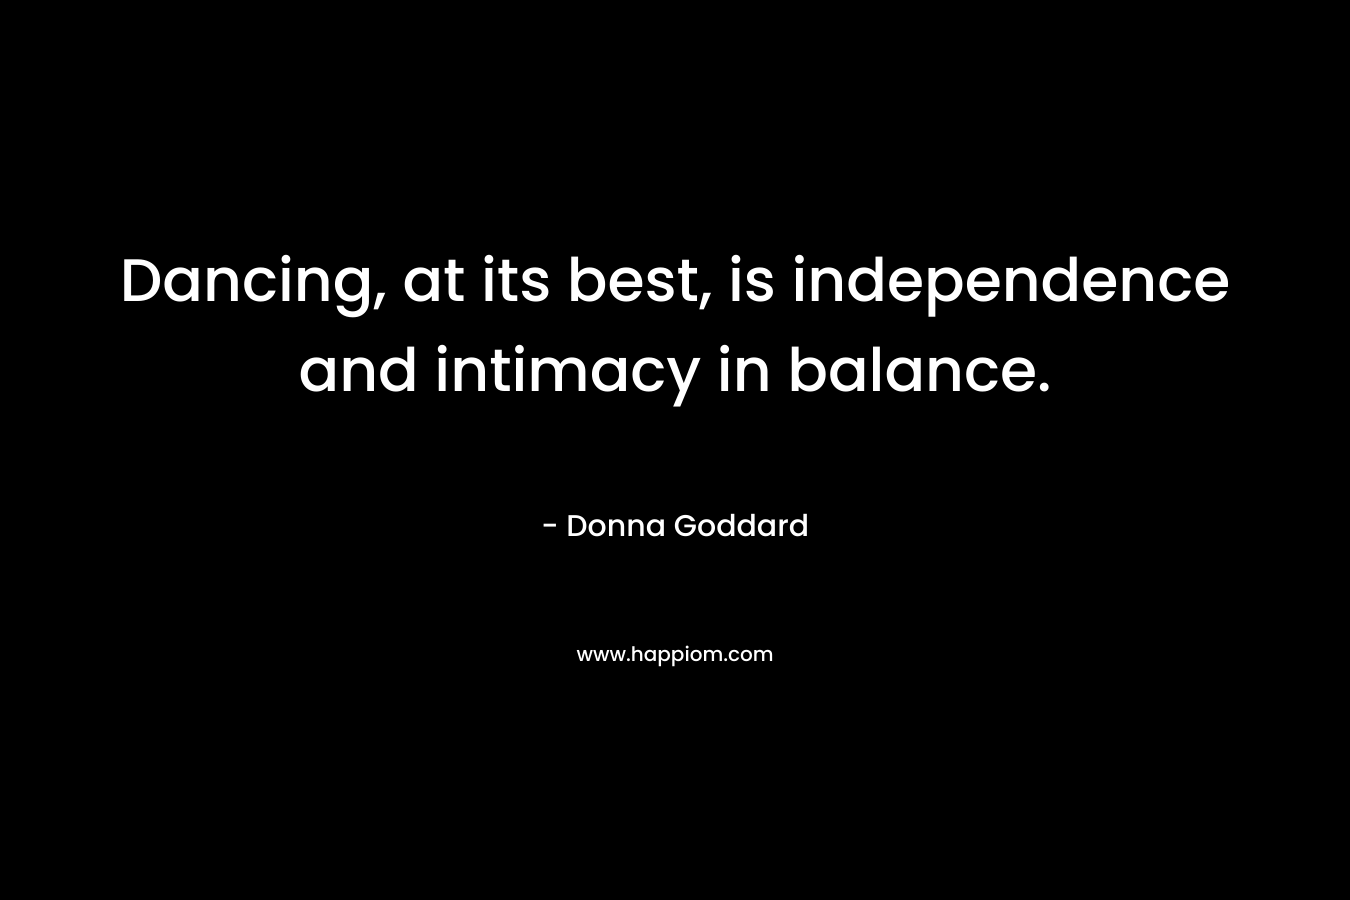 Dancing, at its best, is independence and intimacy in balance.